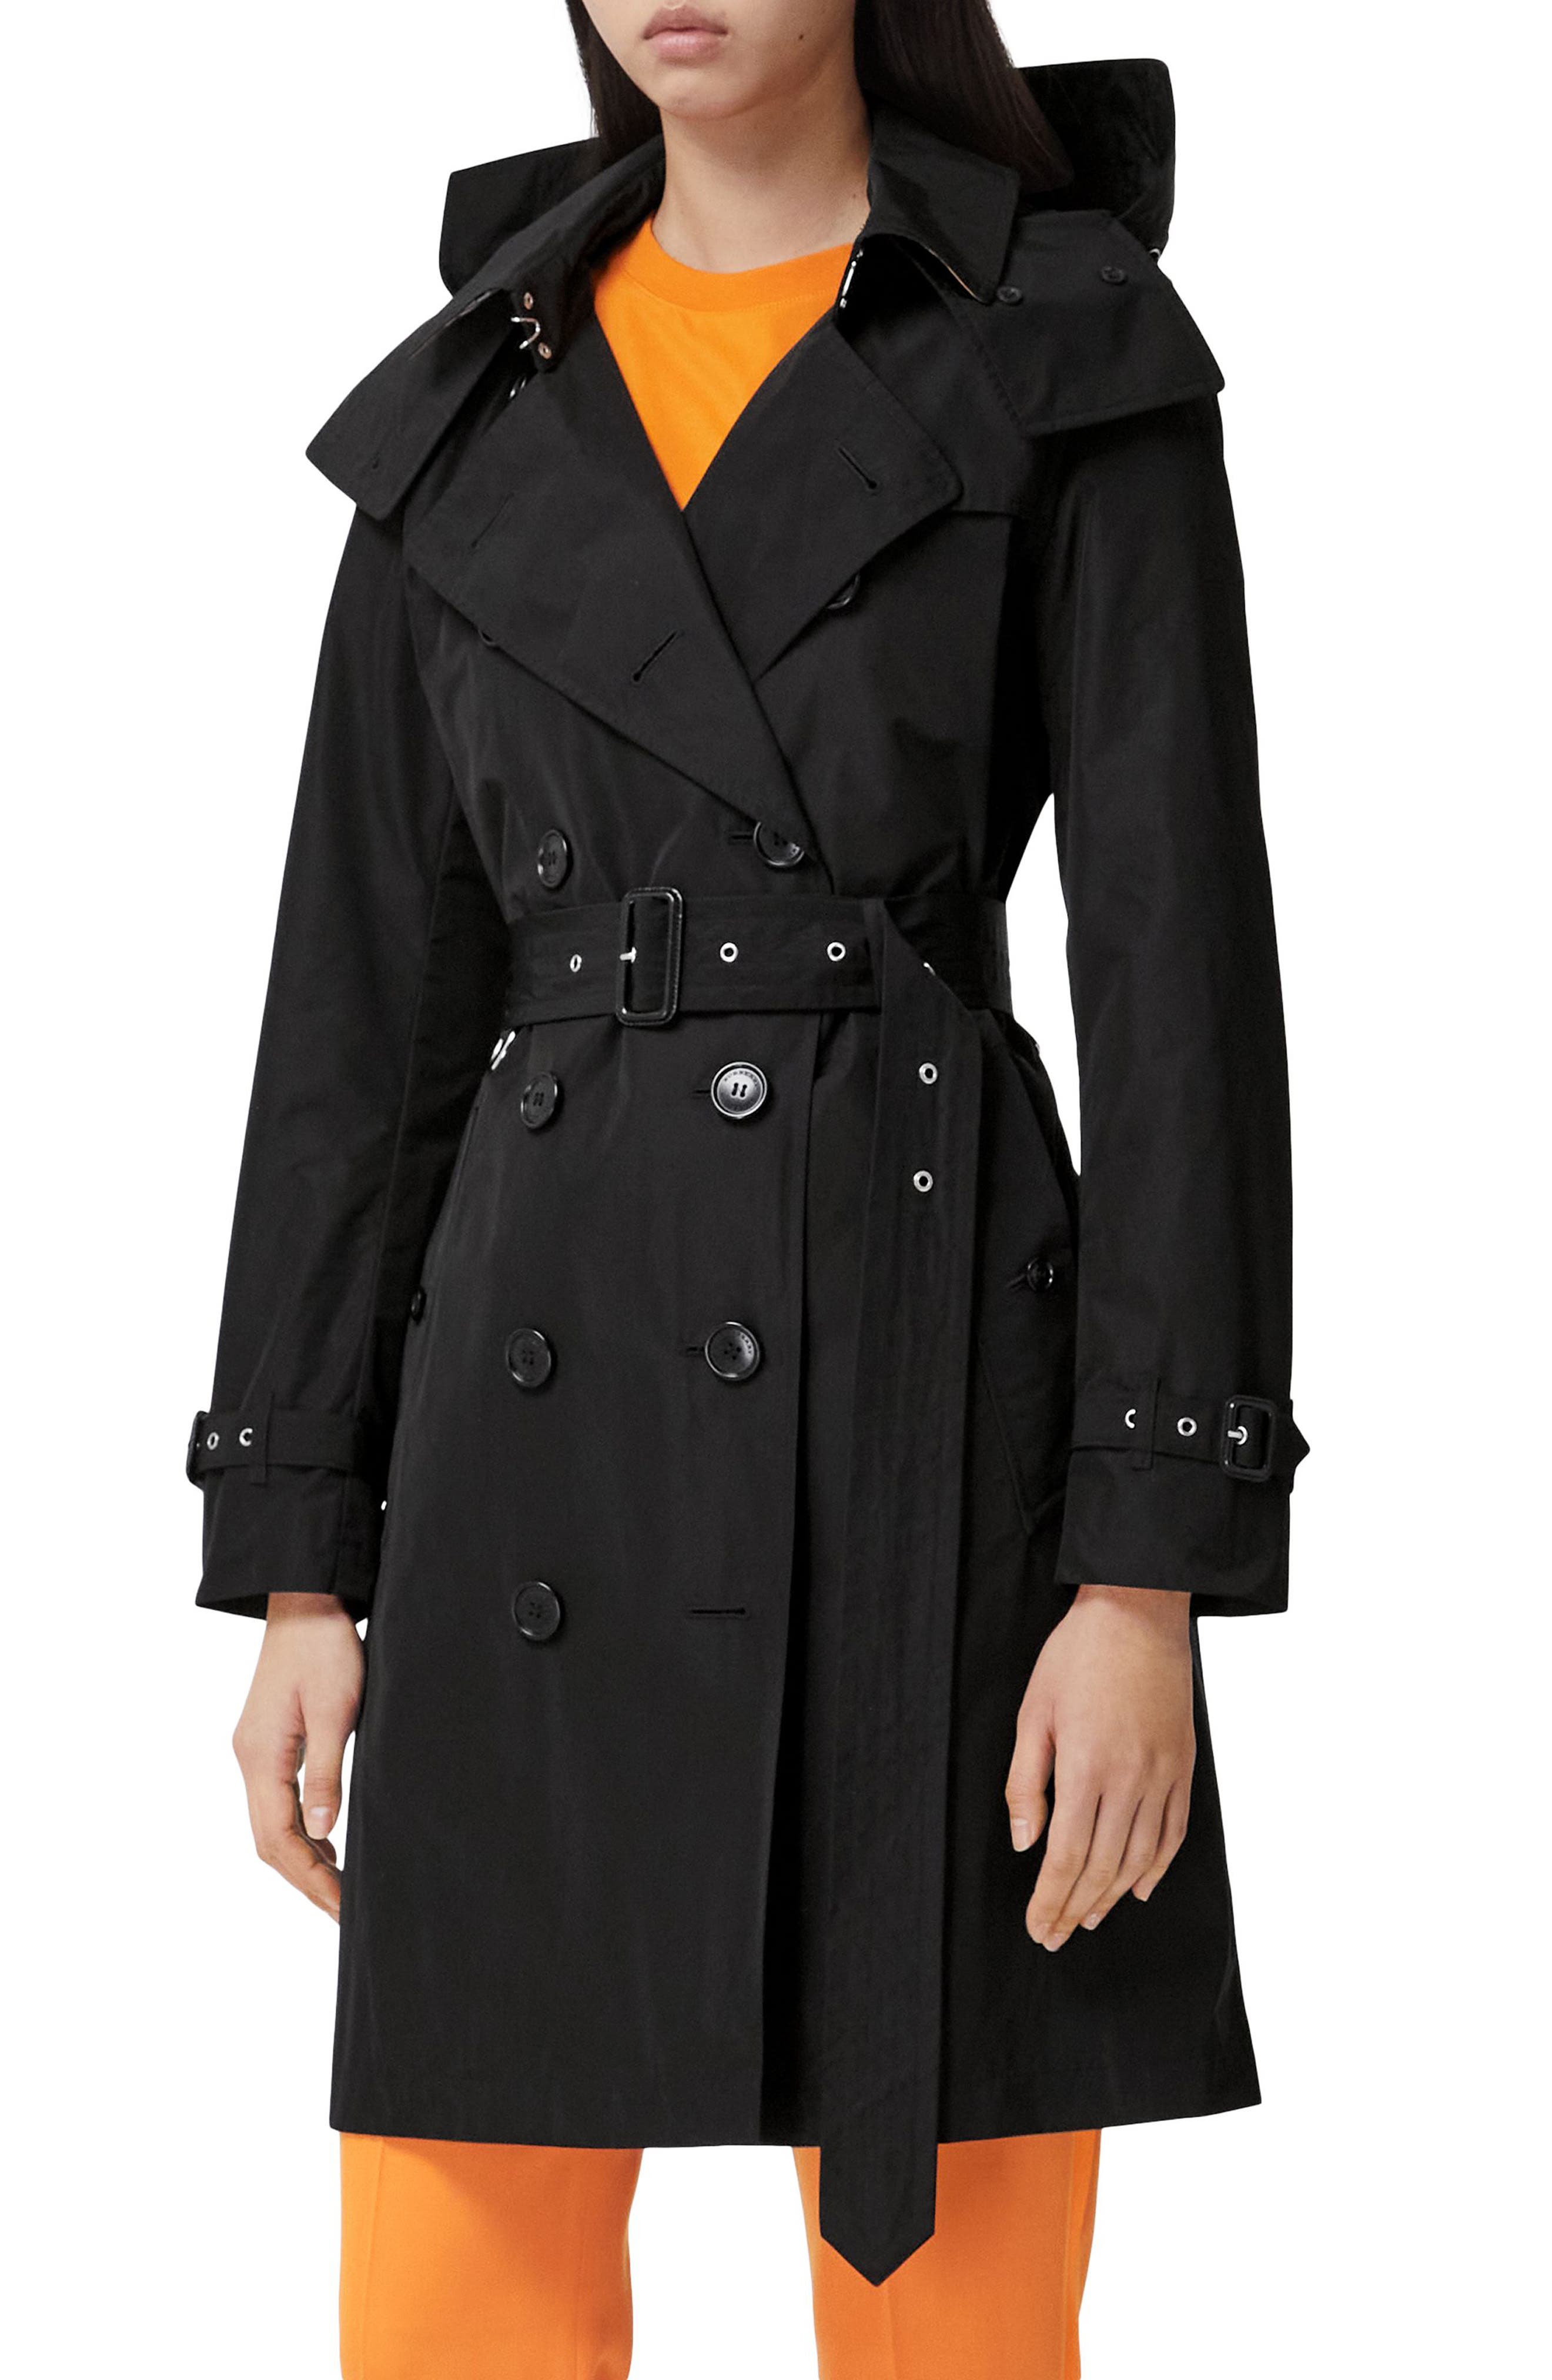 Women's Double Breasted Water Proof Cotton The Kensington Trench Coat Outwear 